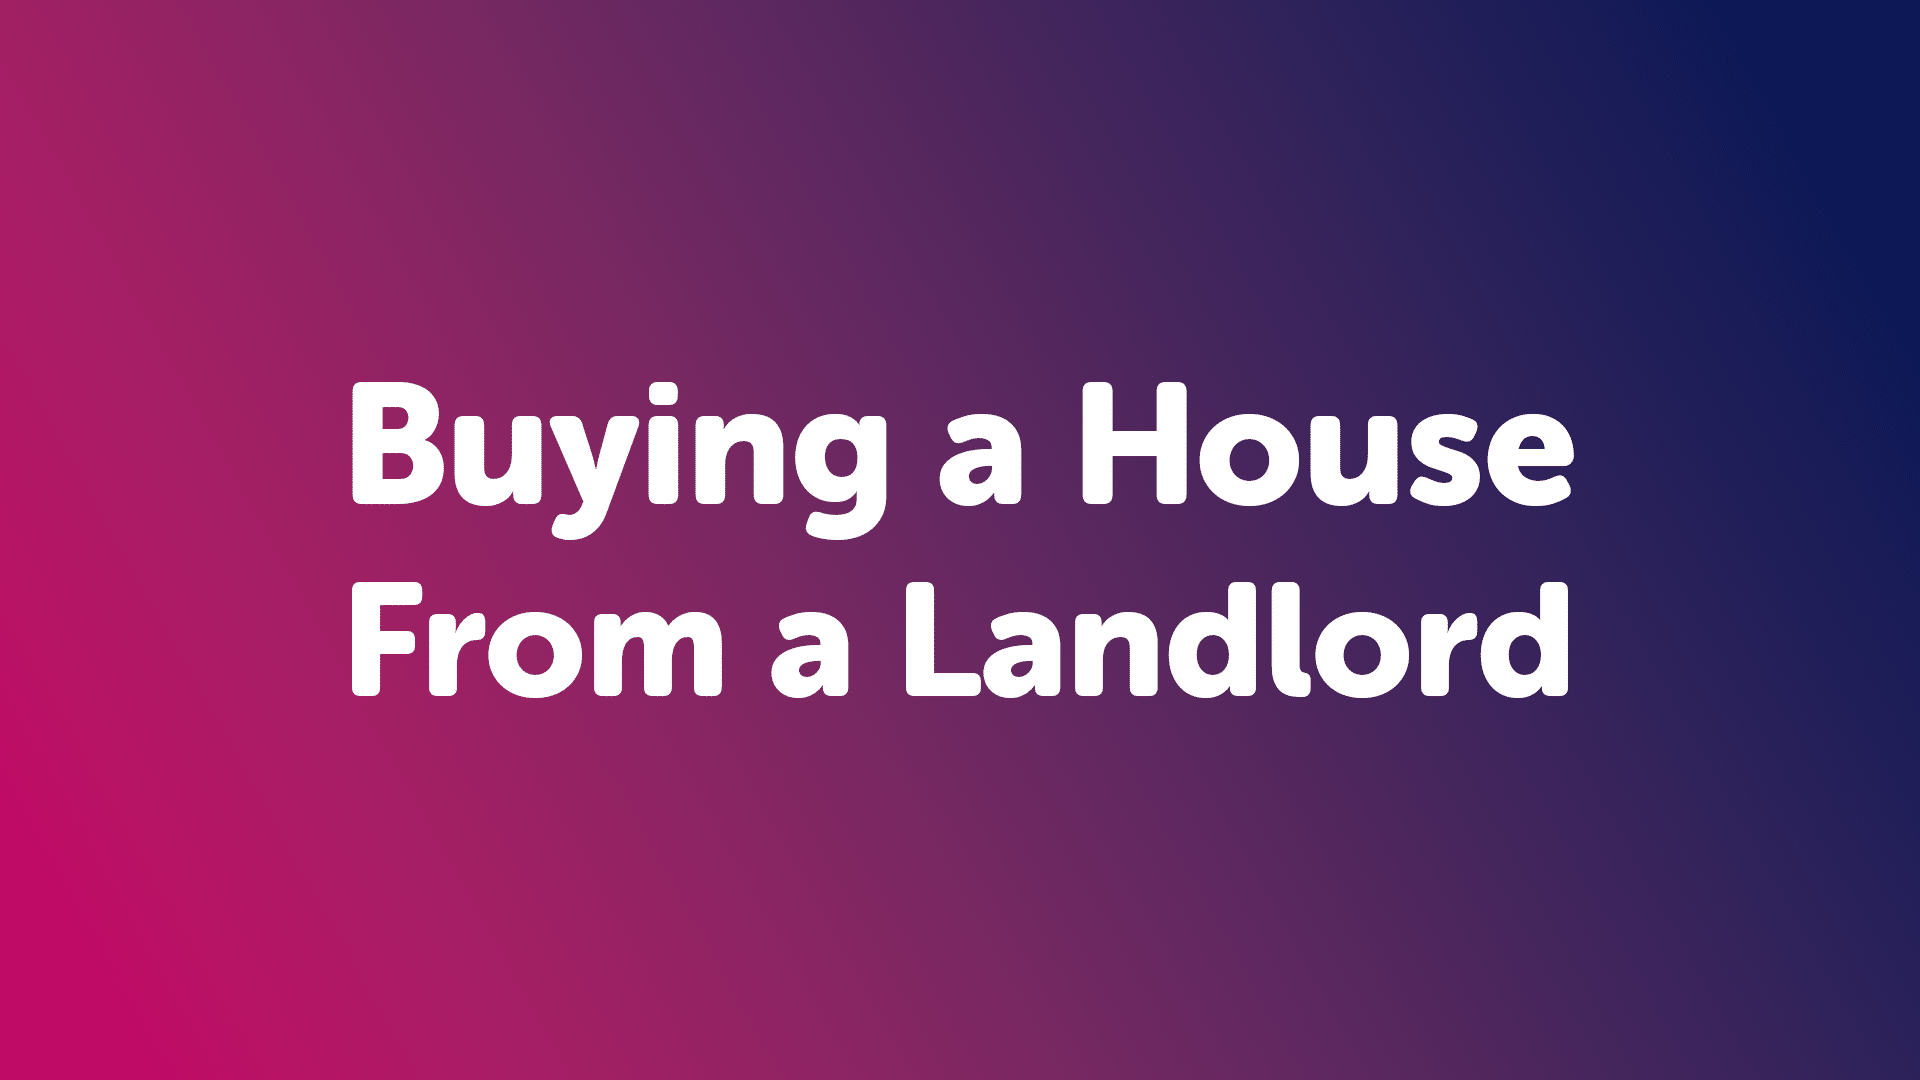 Buying a House From a Landlord in Halifax